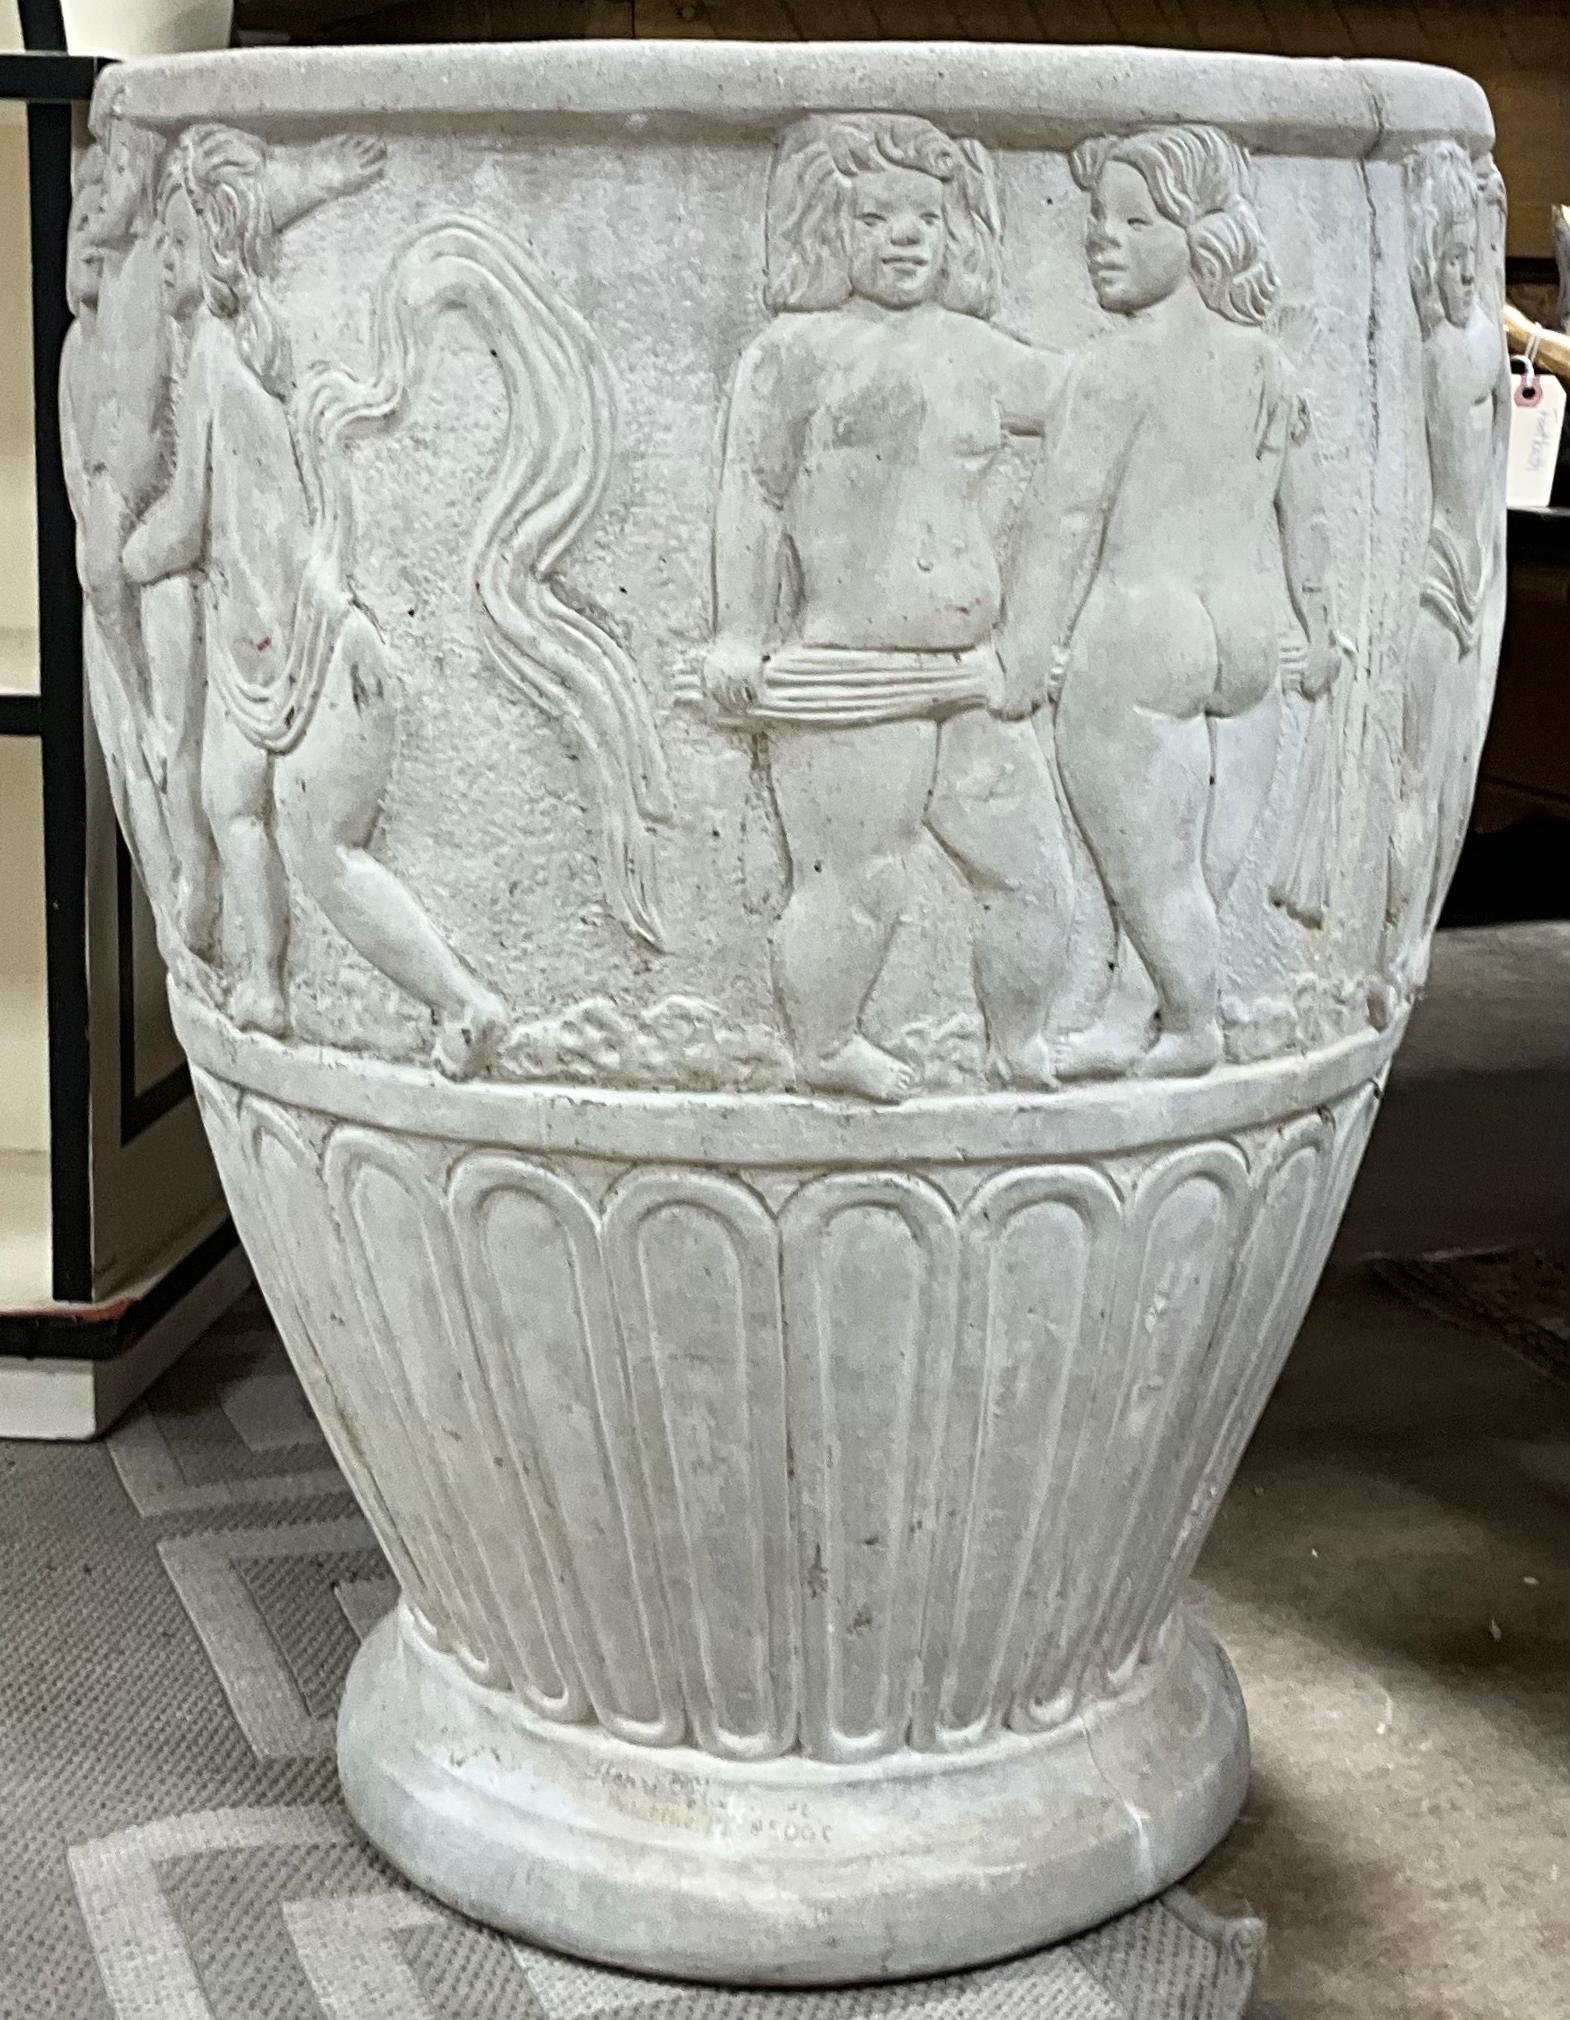 Henri Studios was established in the 1960s by Italian artisan Eneri Prosperi in Chicago. They are considered the leaders for cast stone garden ornamentation. Today, they have combined the Italian craftsmanship with American engineering to create a